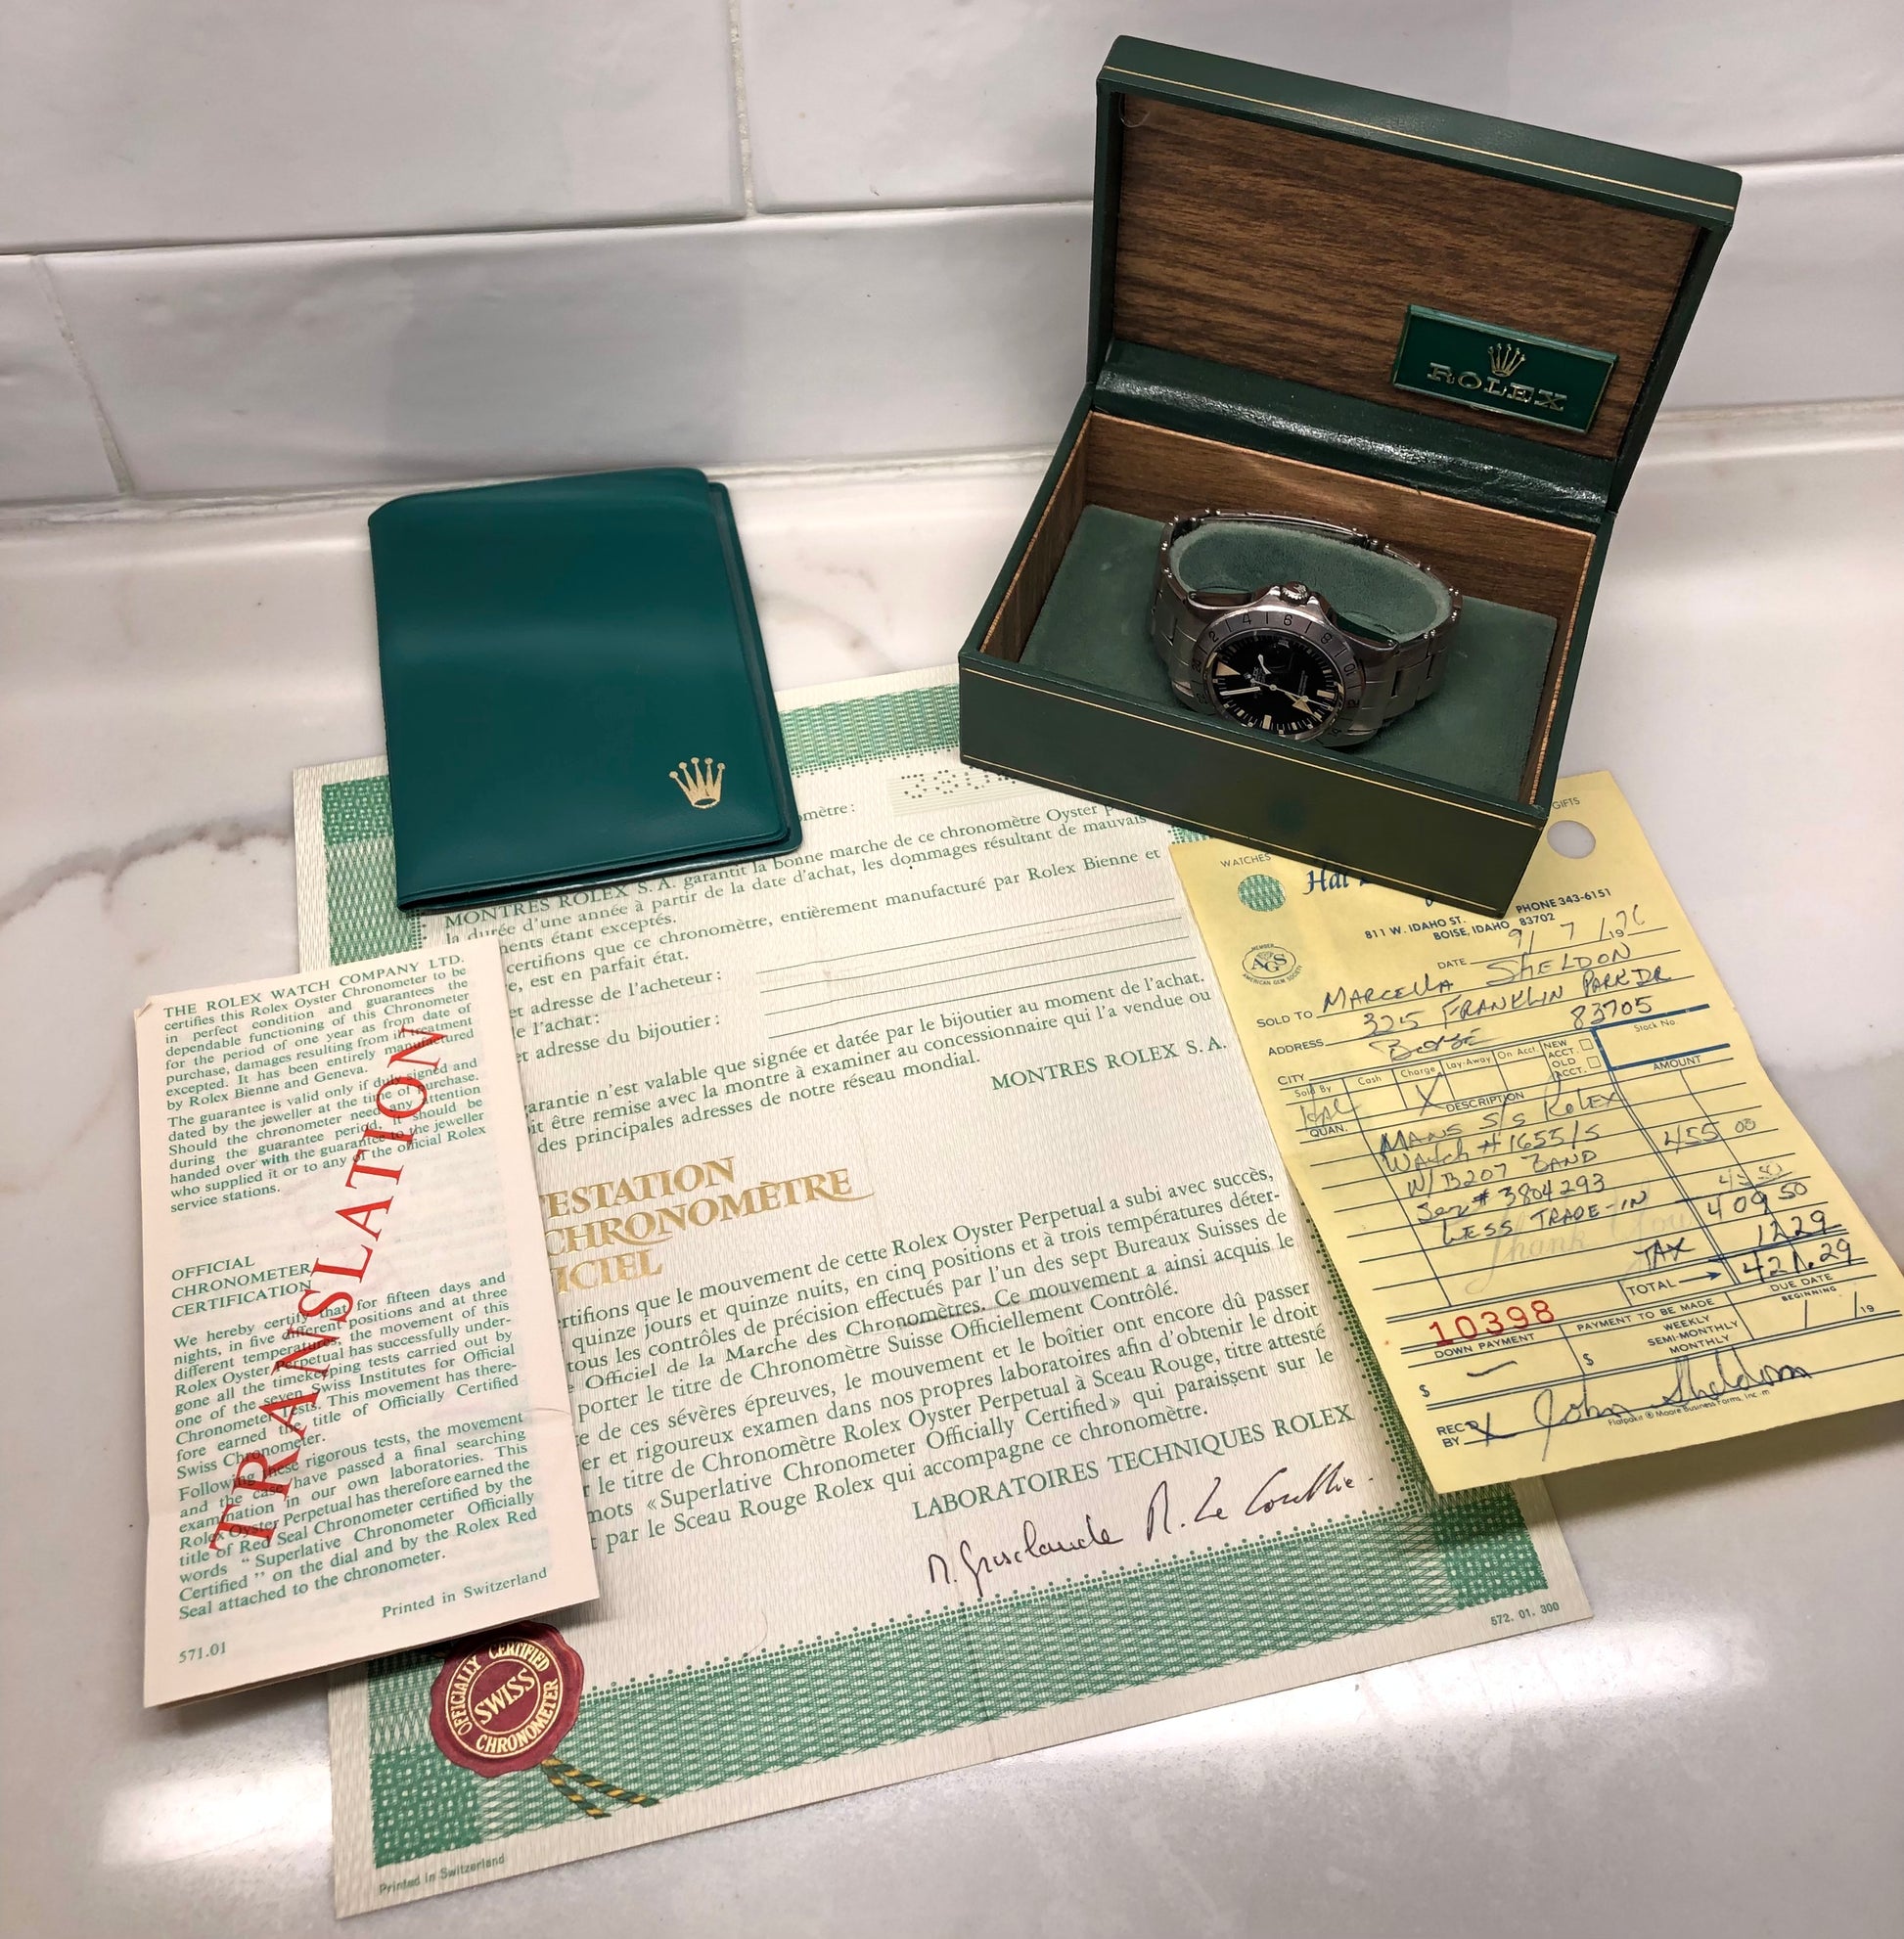 1975 Rolex Explorer II 1655 Mk 2 Steel Wristwatch with Box Papers and Original Purchase Receipt - HASHTAGWATCHCO